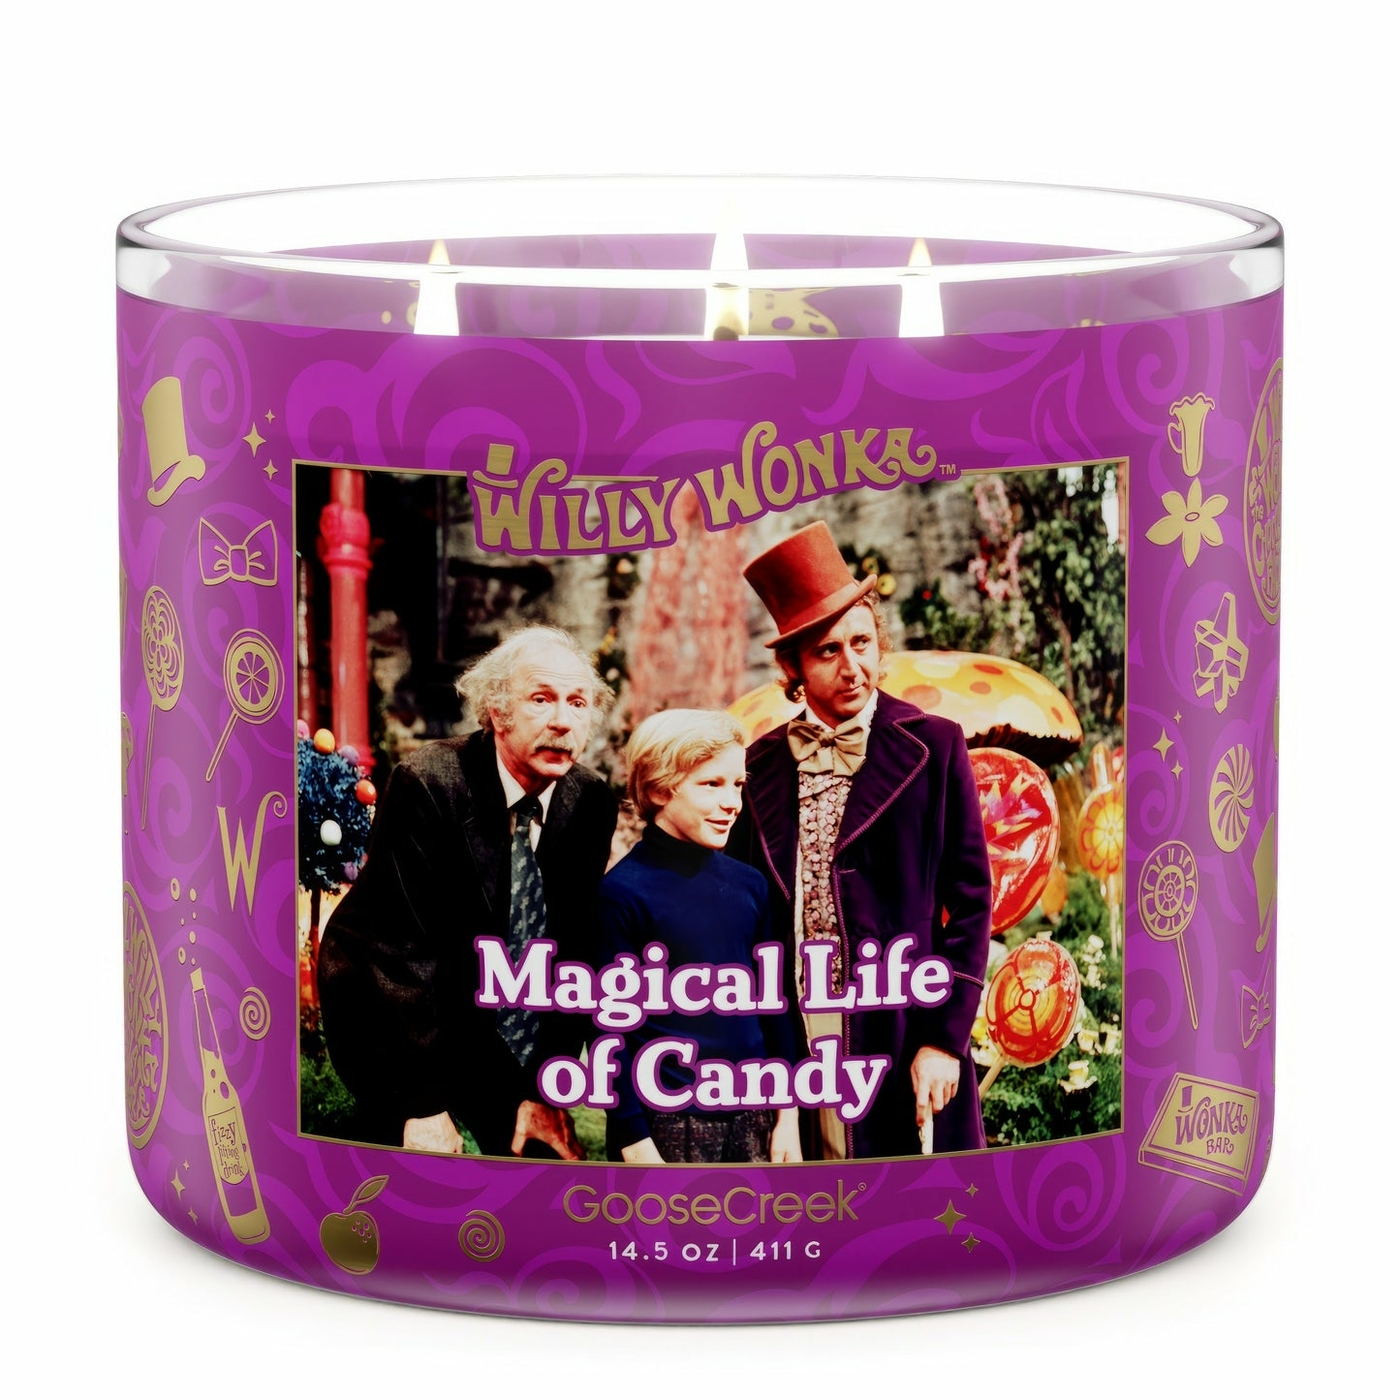 Magical Life of Candy